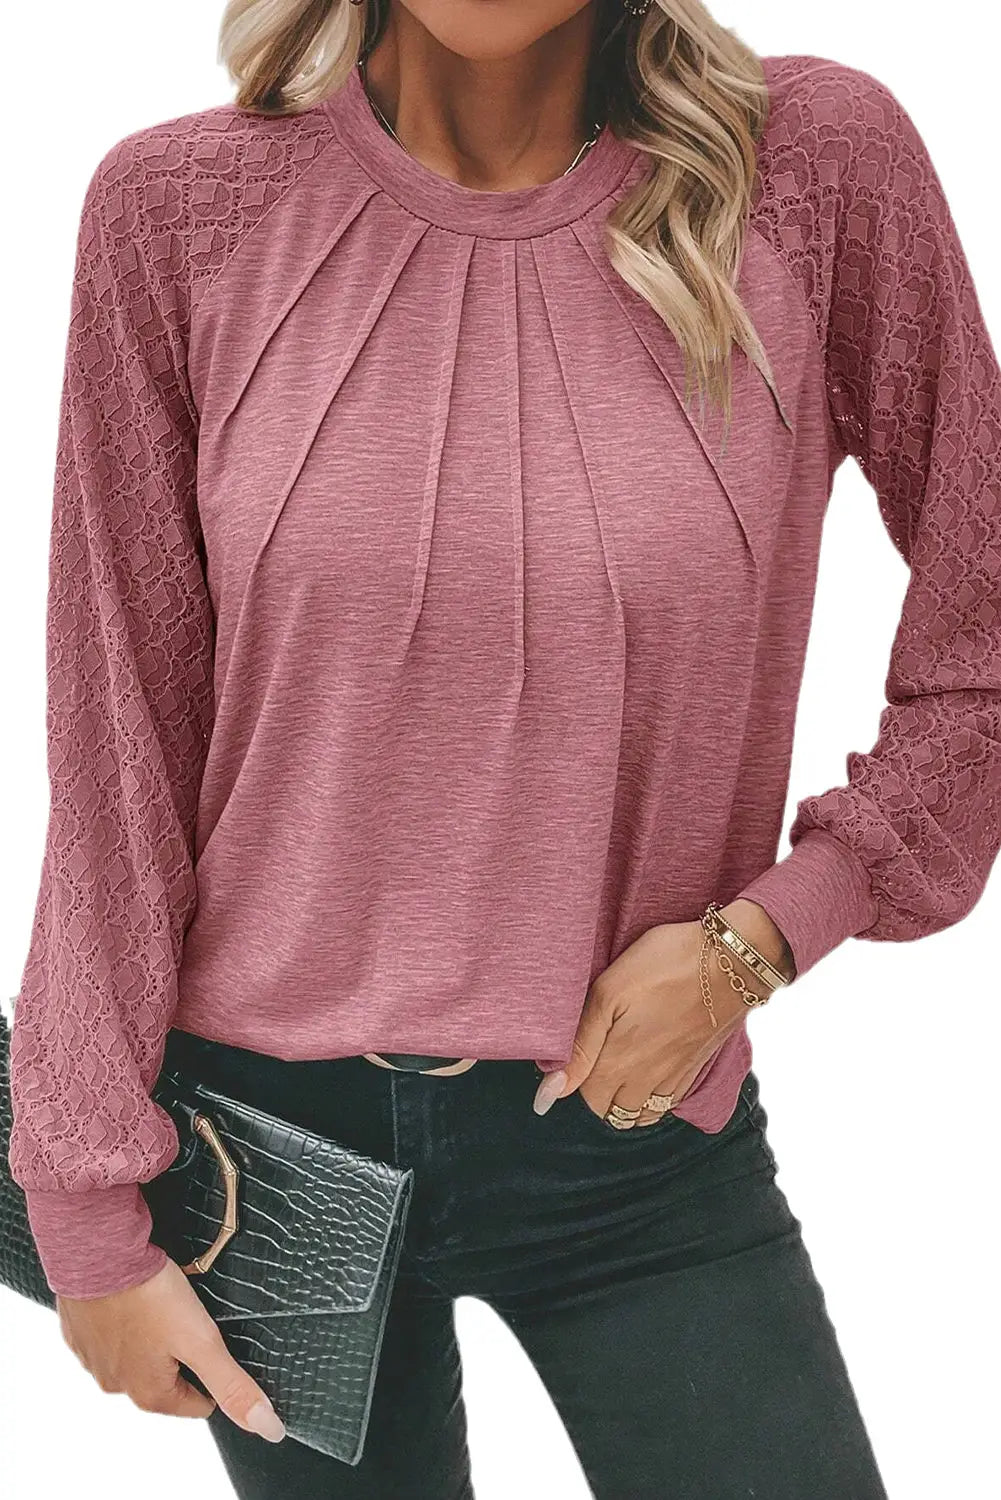 Rose pink contrast lace raglan sleeve plicate round neck top - long tops